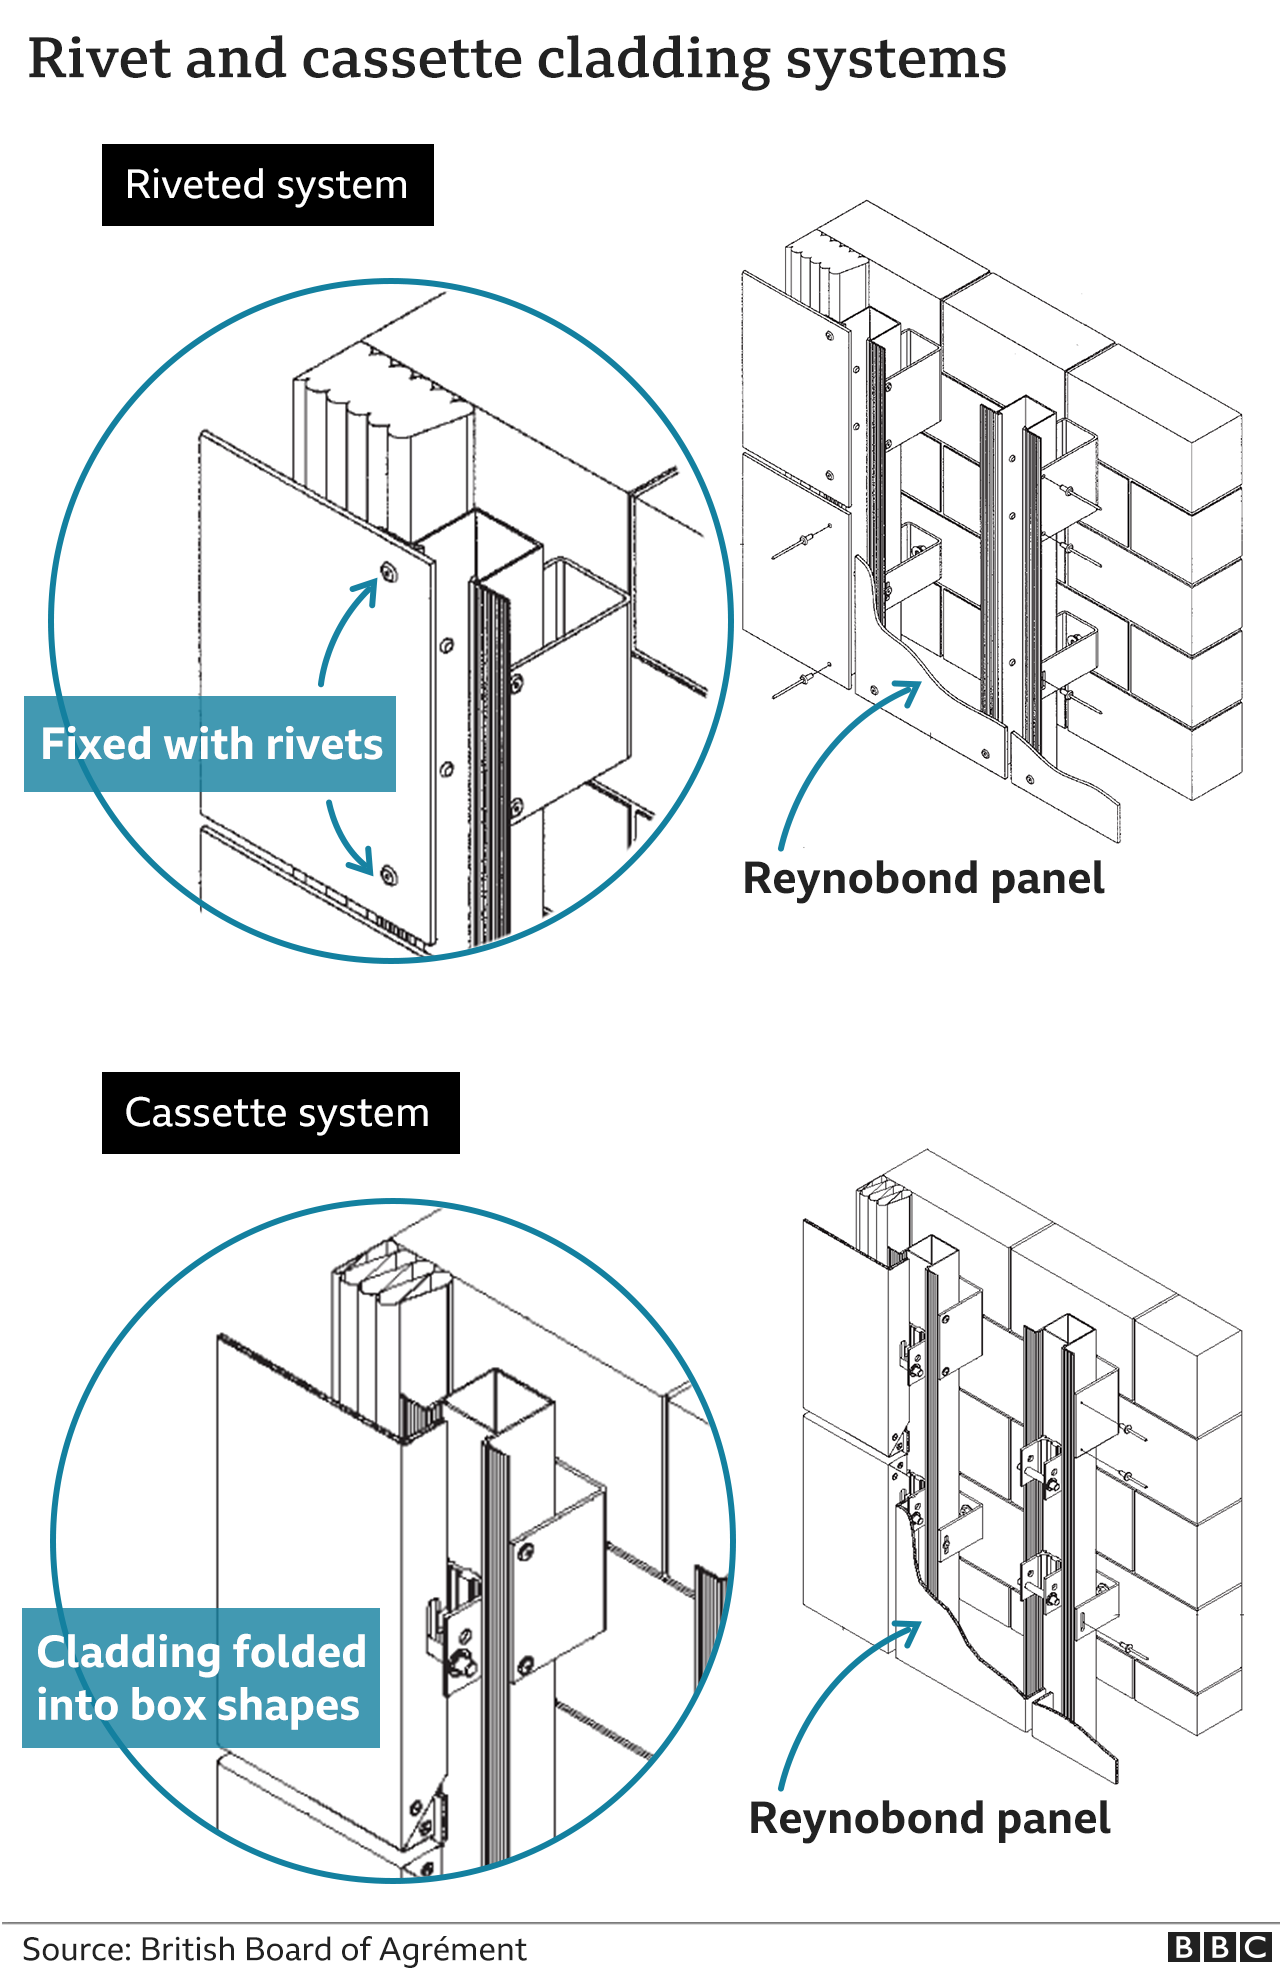 Graphic showing rivet and cassette cladding systems